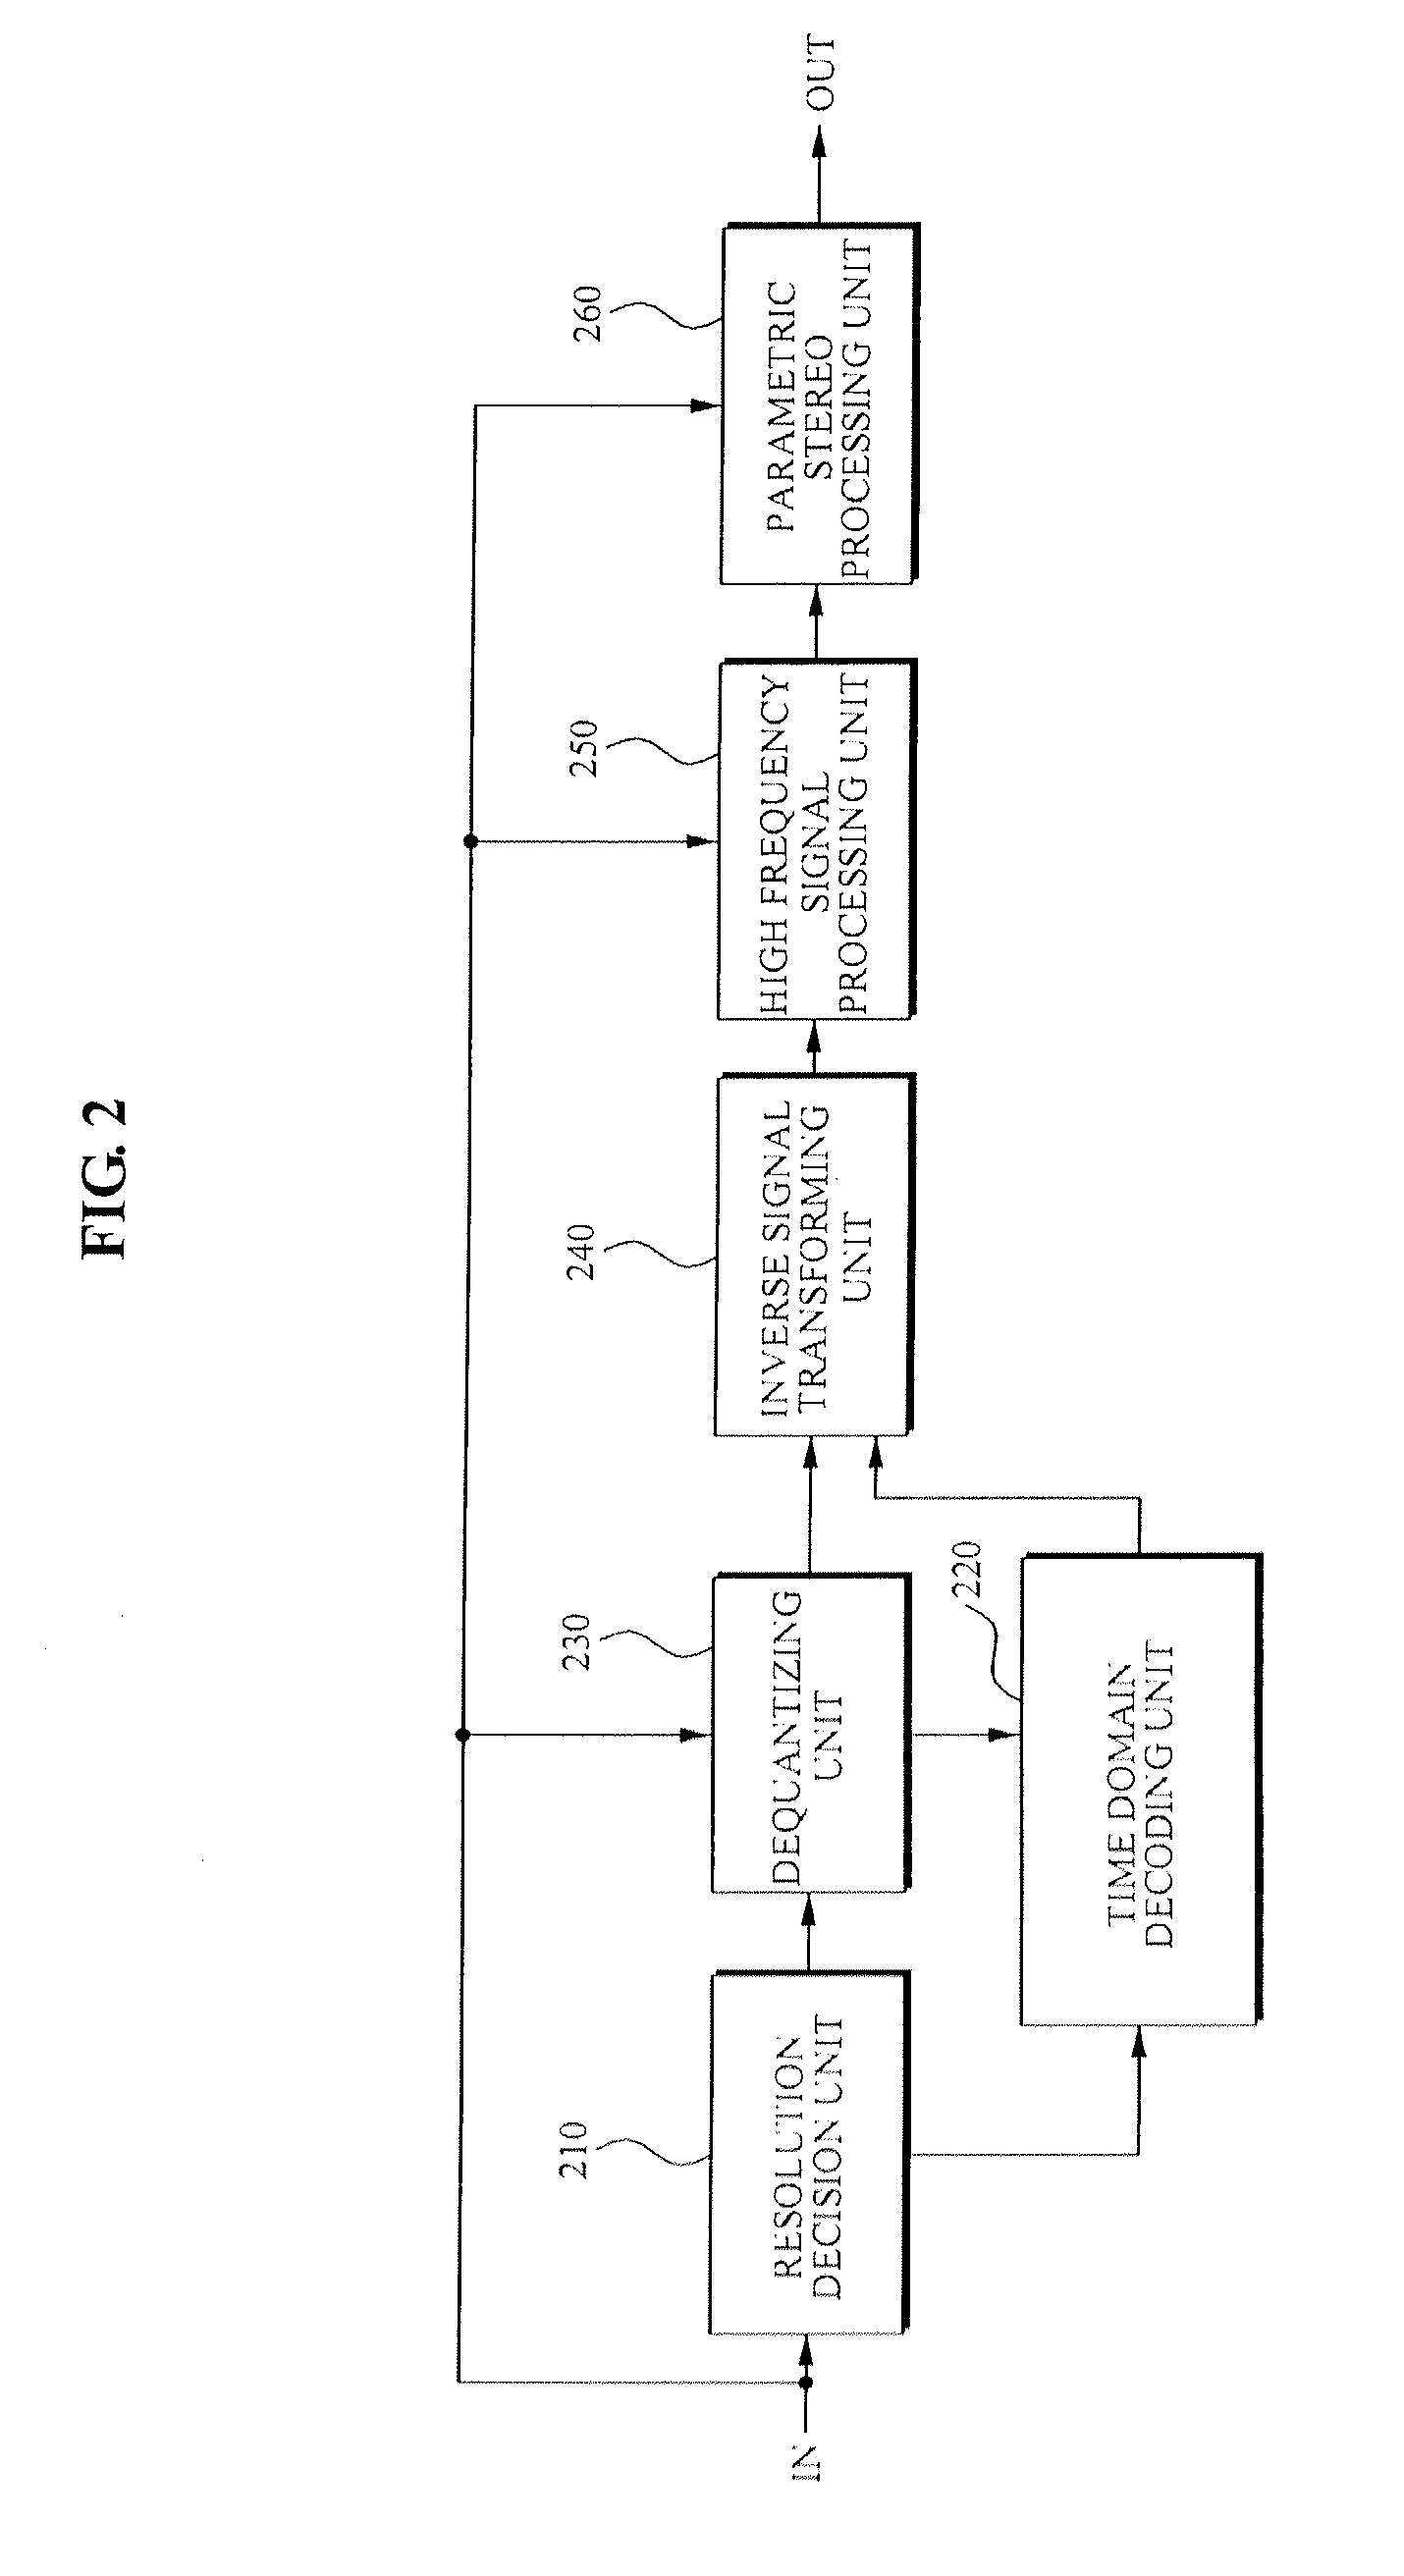 Method and apparatus to encode and decode an audio/speech signal